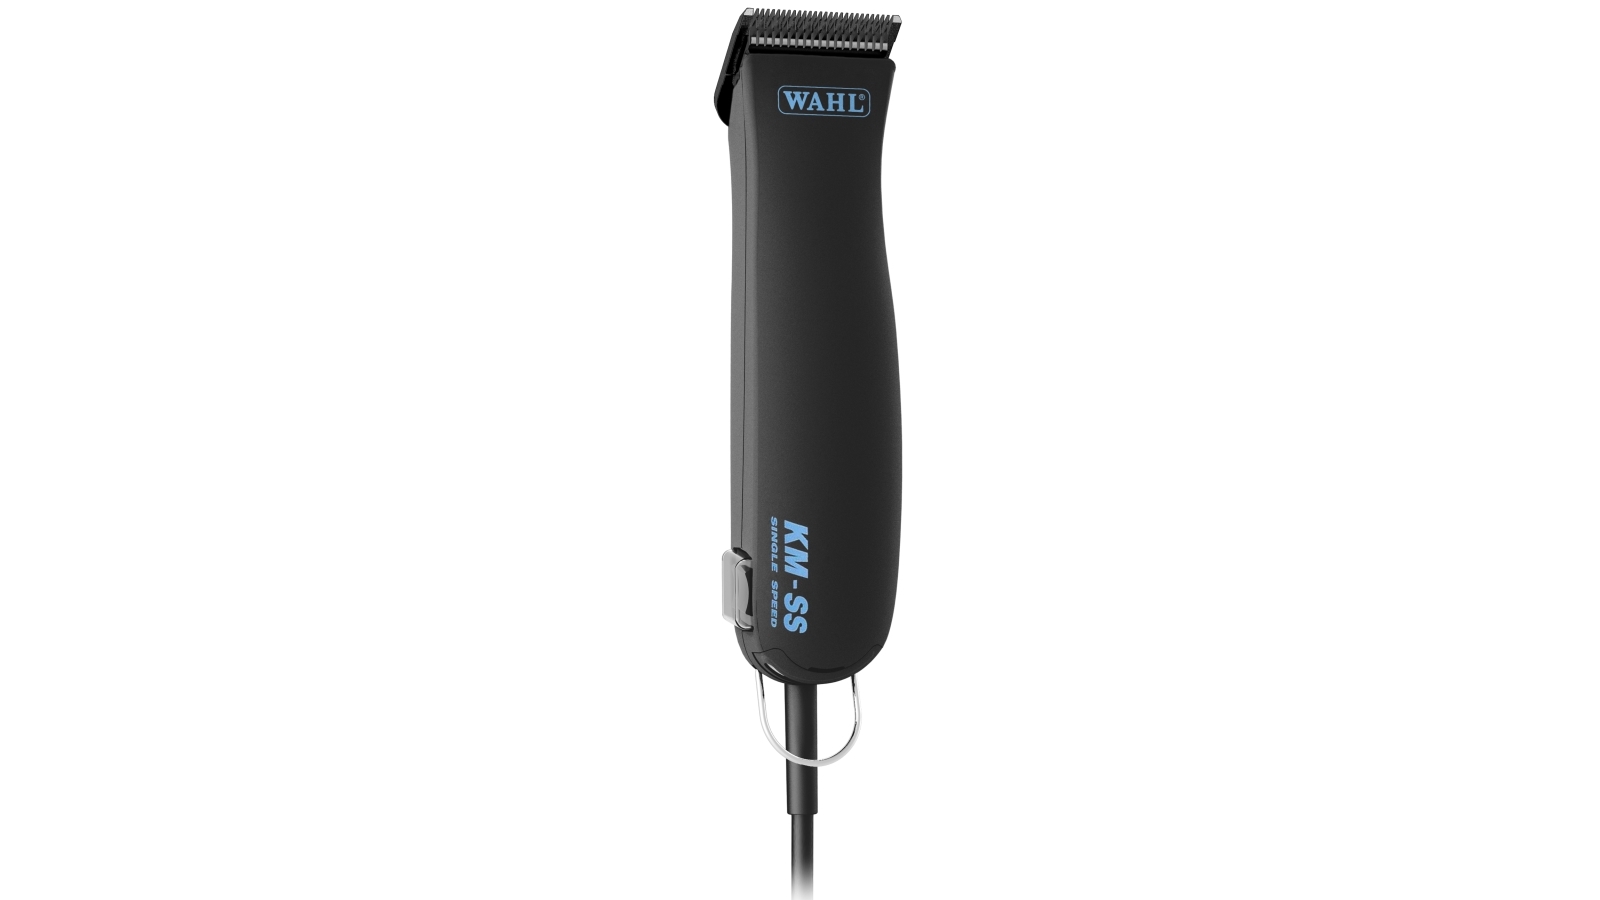 wahl pet hair clippers & trimmers